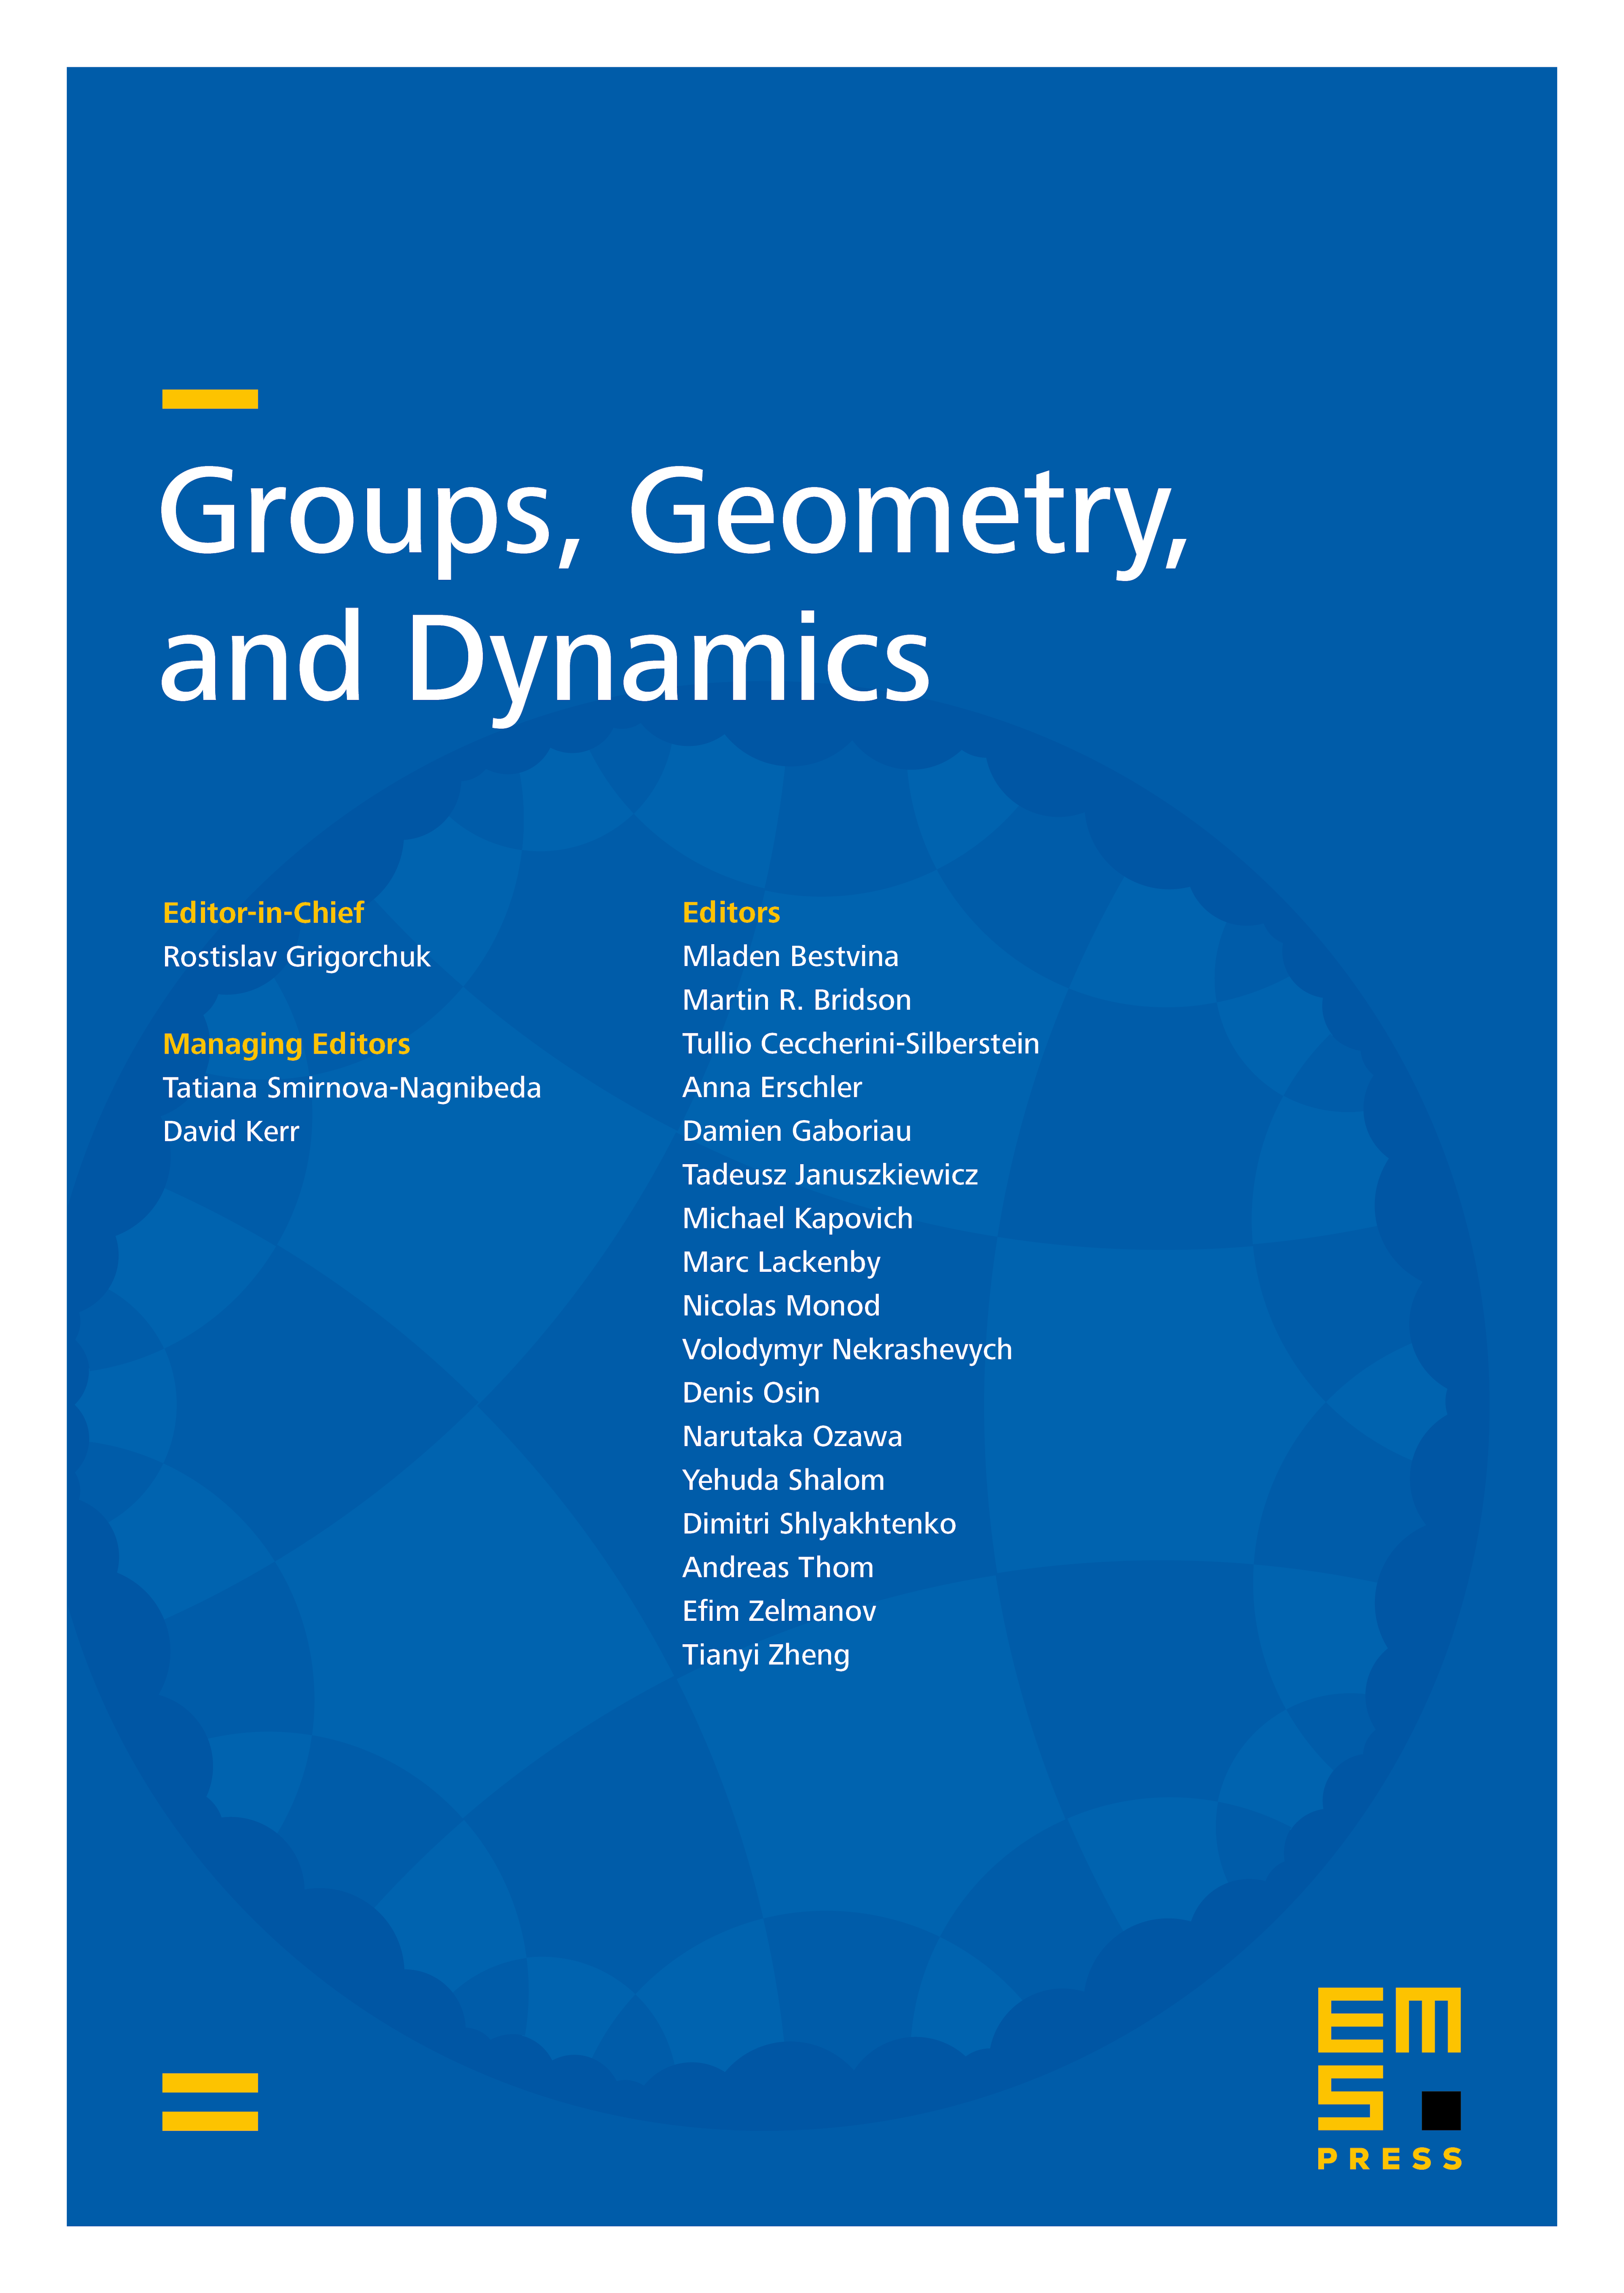 Fillings, finite generation and direct limits of relatively hyperbolic groups cover